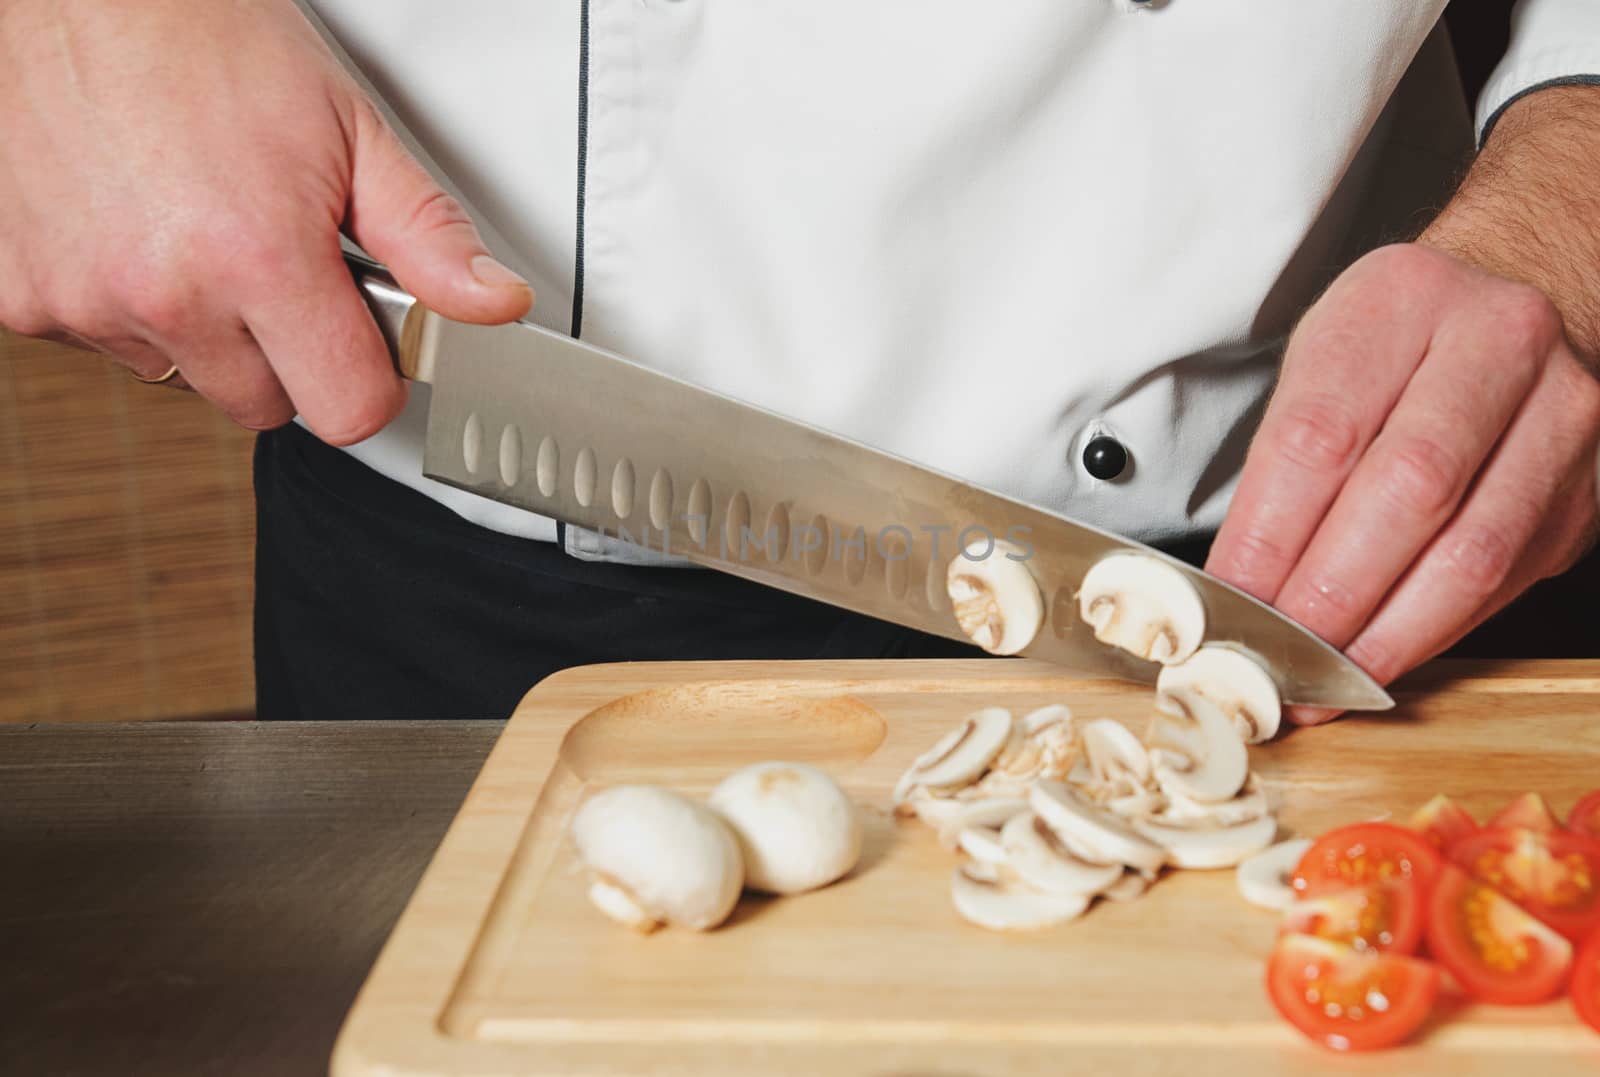 chef cutting mushrooms and tomats on table with knife